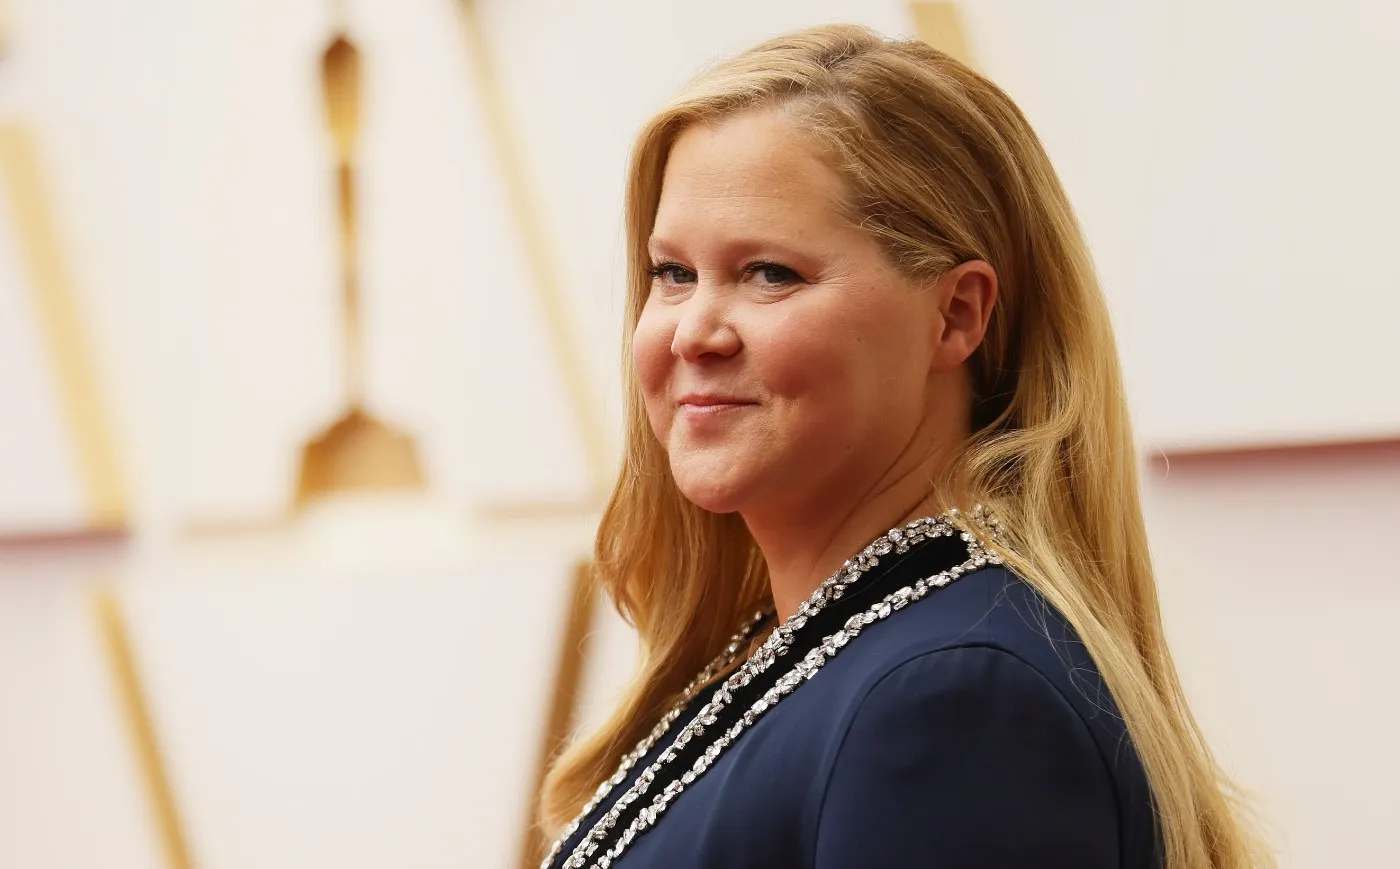 Amy Schumer at the Oscars